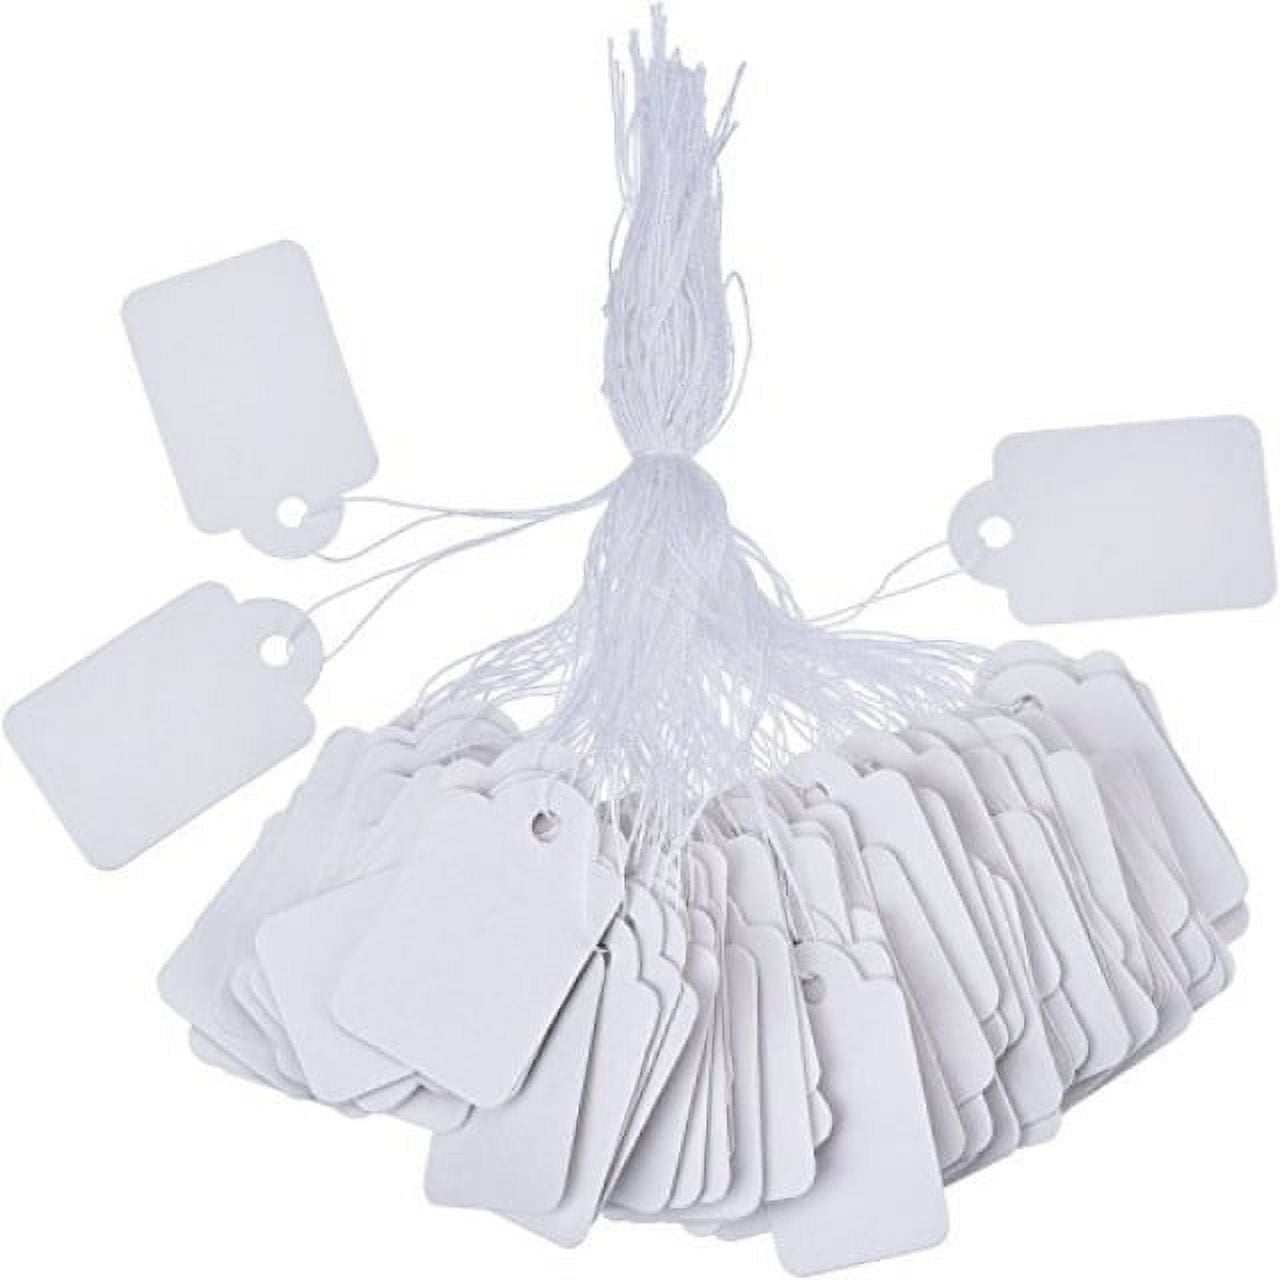 Colaxi 200pcs Price Tags with String Attached, Blank Labeling Tags, Price Labels Display Tags, Marking Tags Writable Tags, Display Label, Clothing Tags White